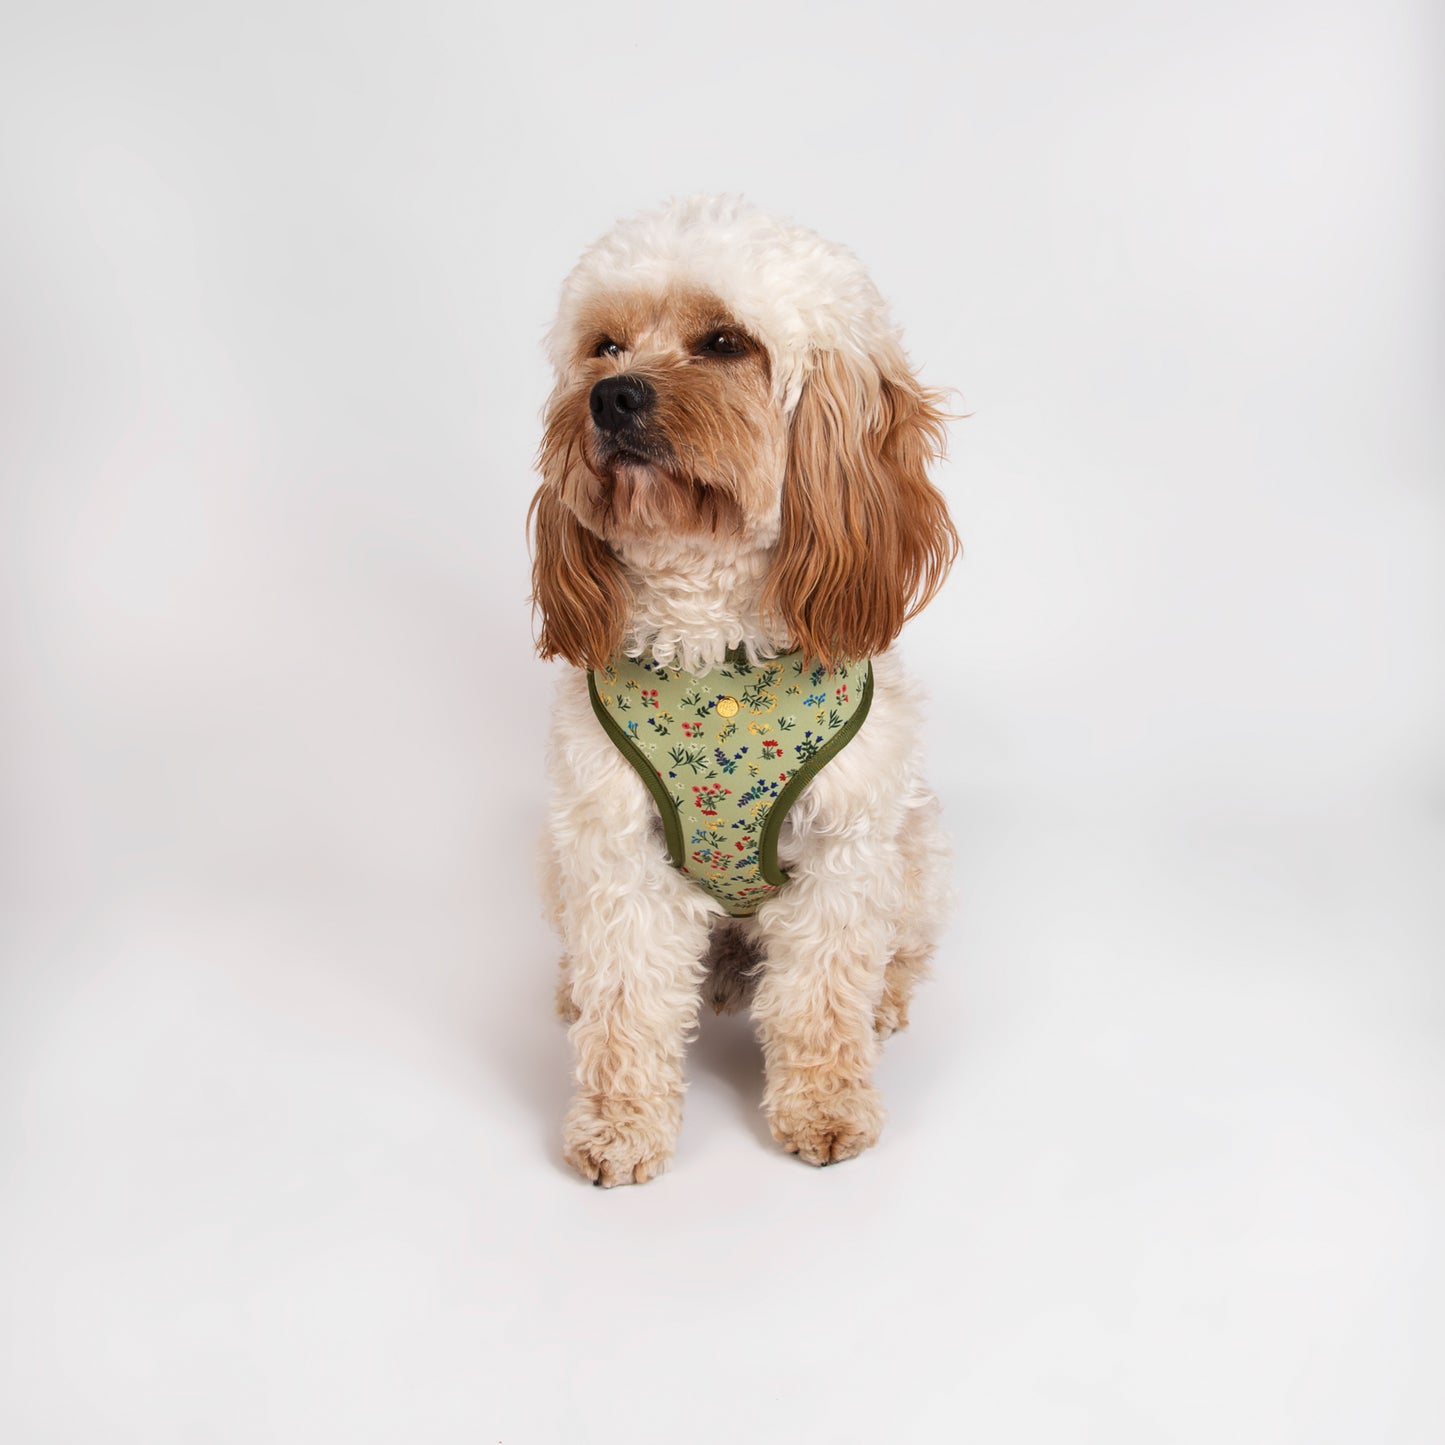 Pata Paw alpine wildflowers reversible harness as seen in a medium dog.